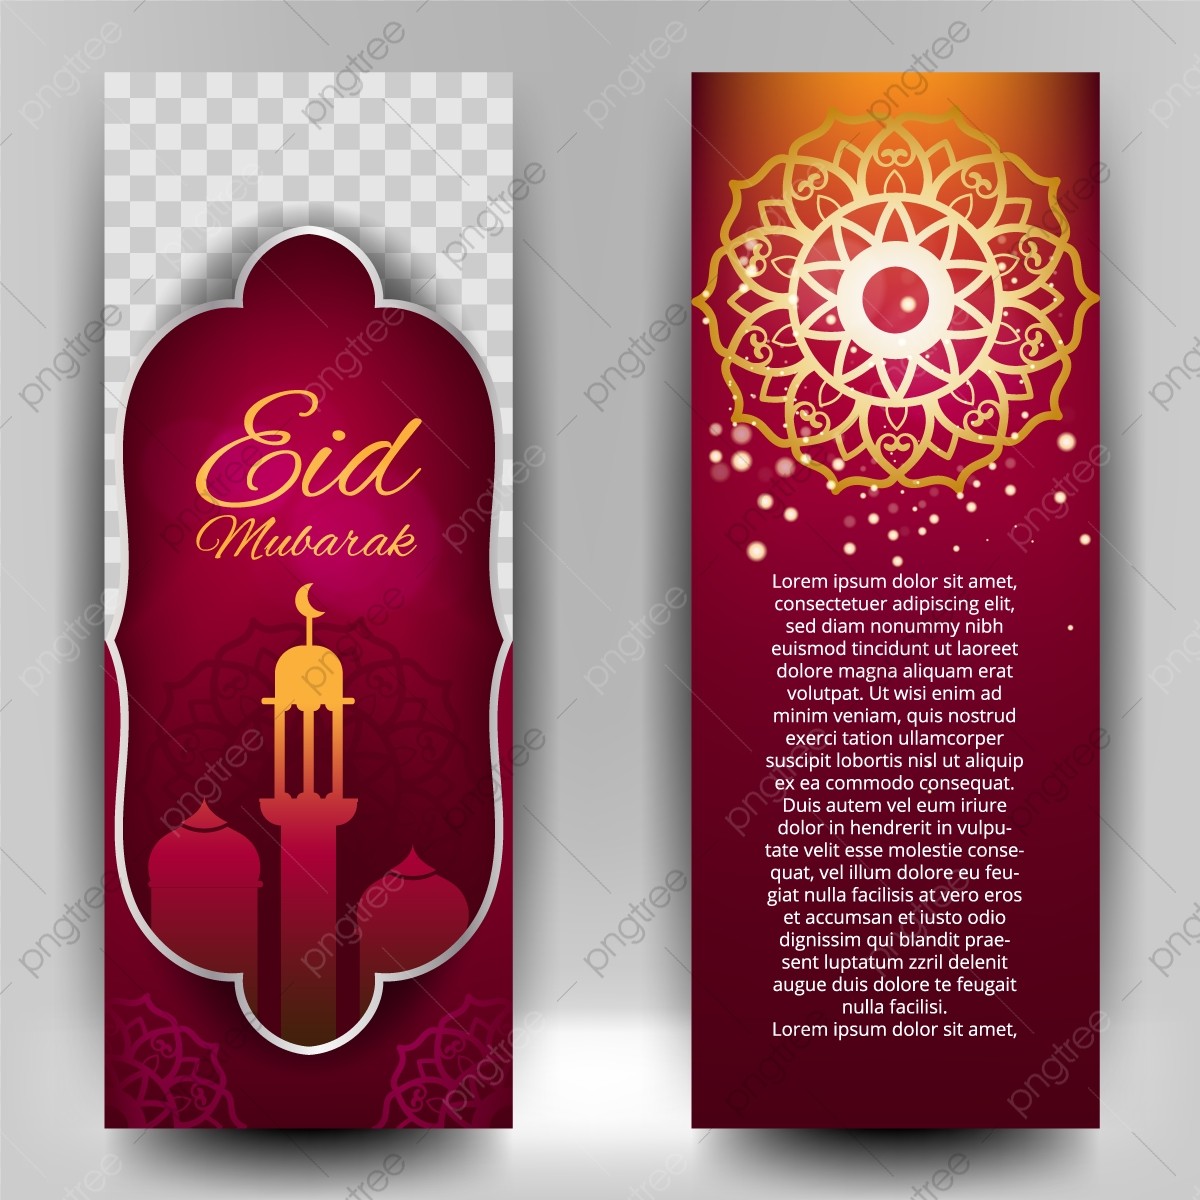 pngtree-set-of-islamic-banner-template-png-image_3577122.jpg